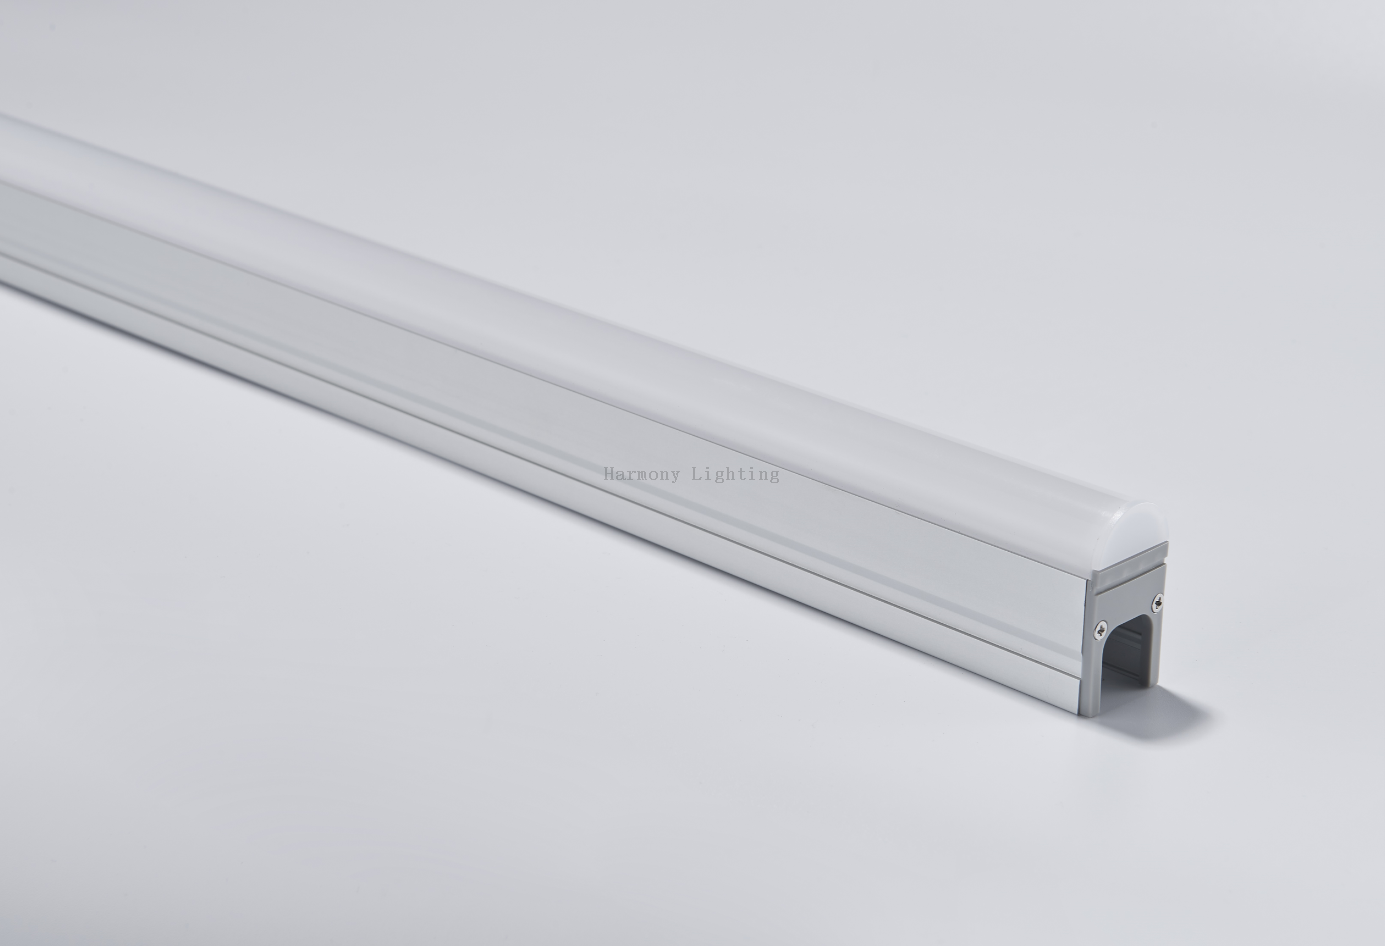 RH-C25 12W Modern Outdoor Bar Fitting Lights Recessed Aluminum outer Wall LED Linear Profile